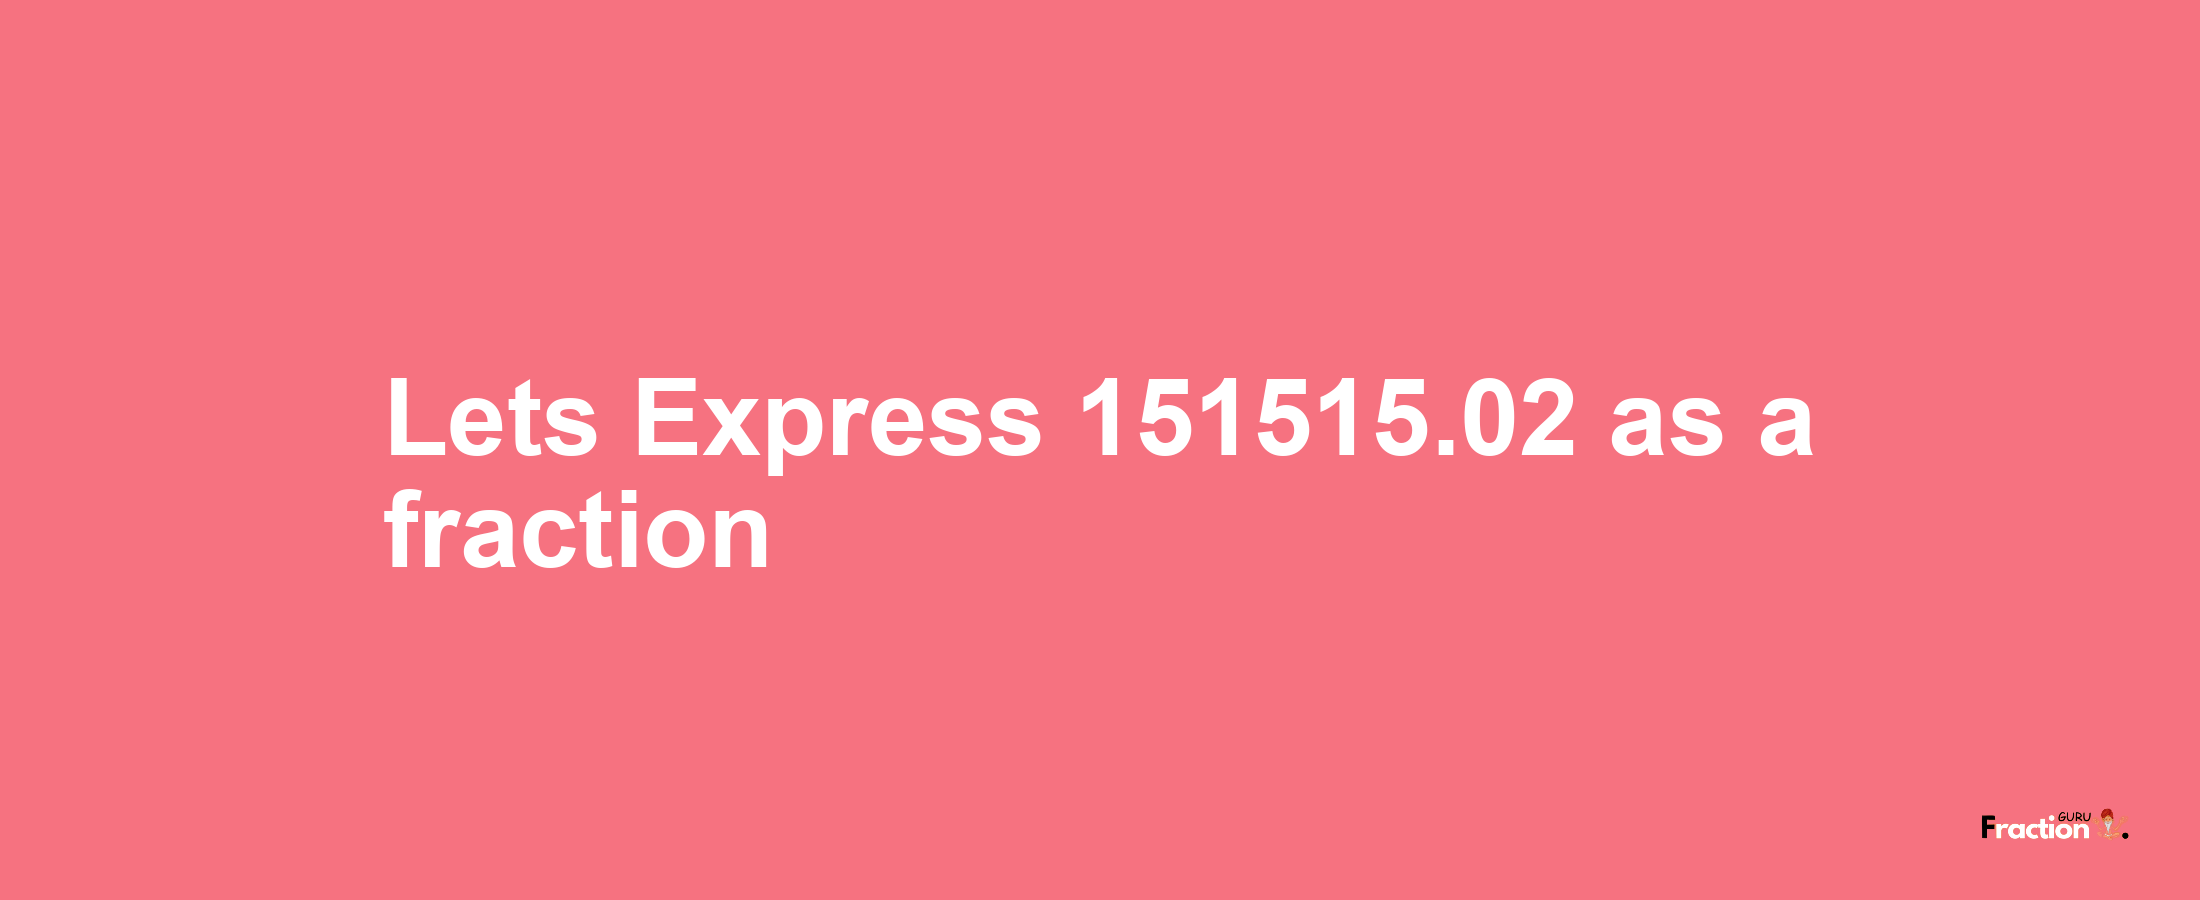 Lets Express 151515.02 as afraction